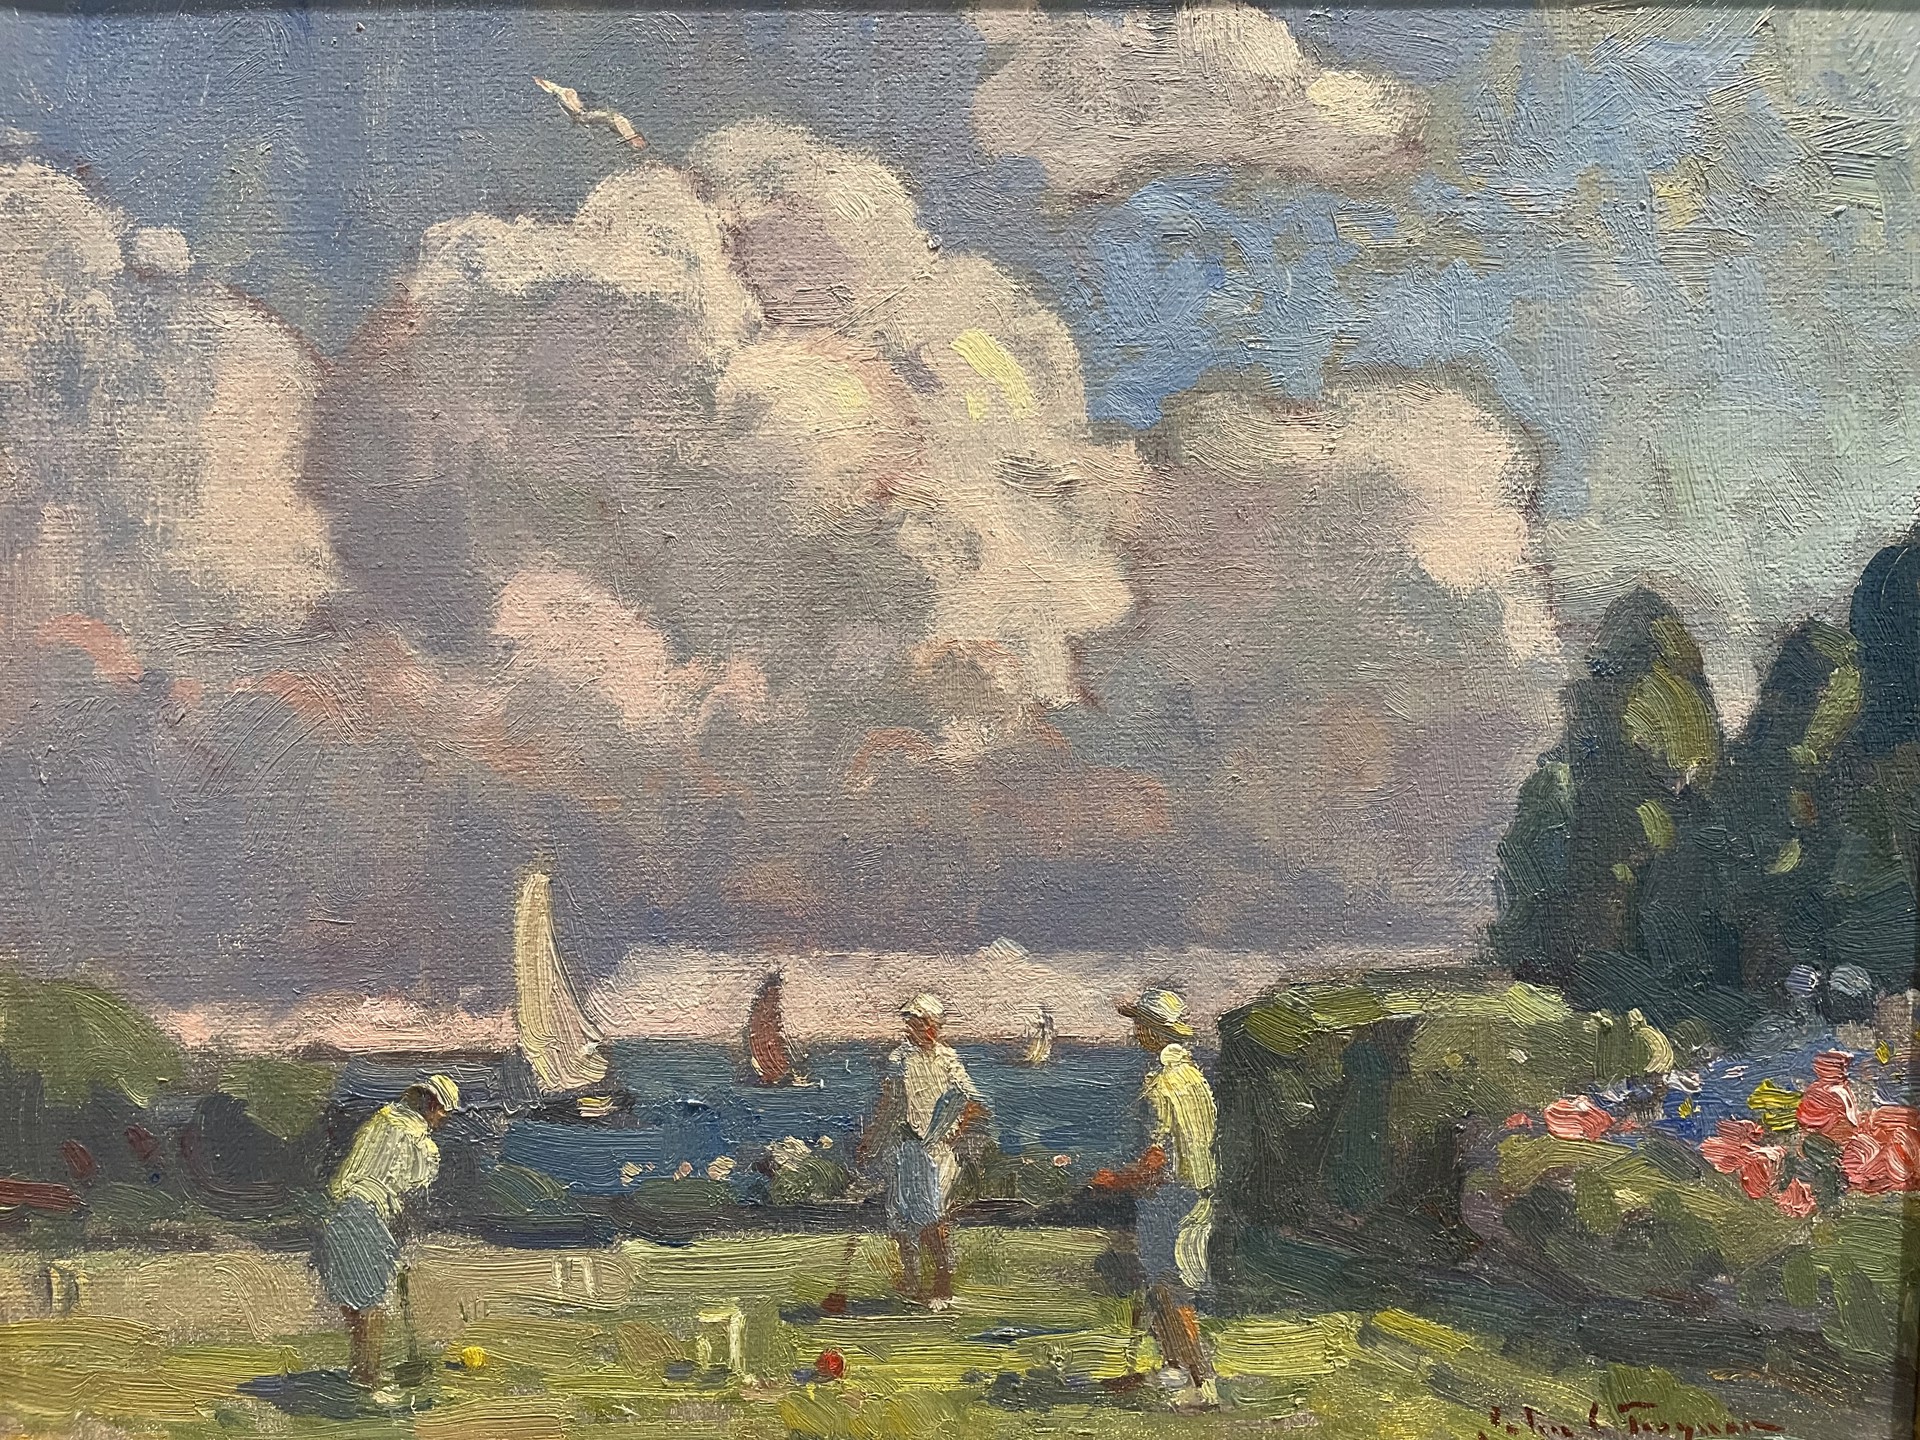 Afternoon Croquet by John C. Traynor